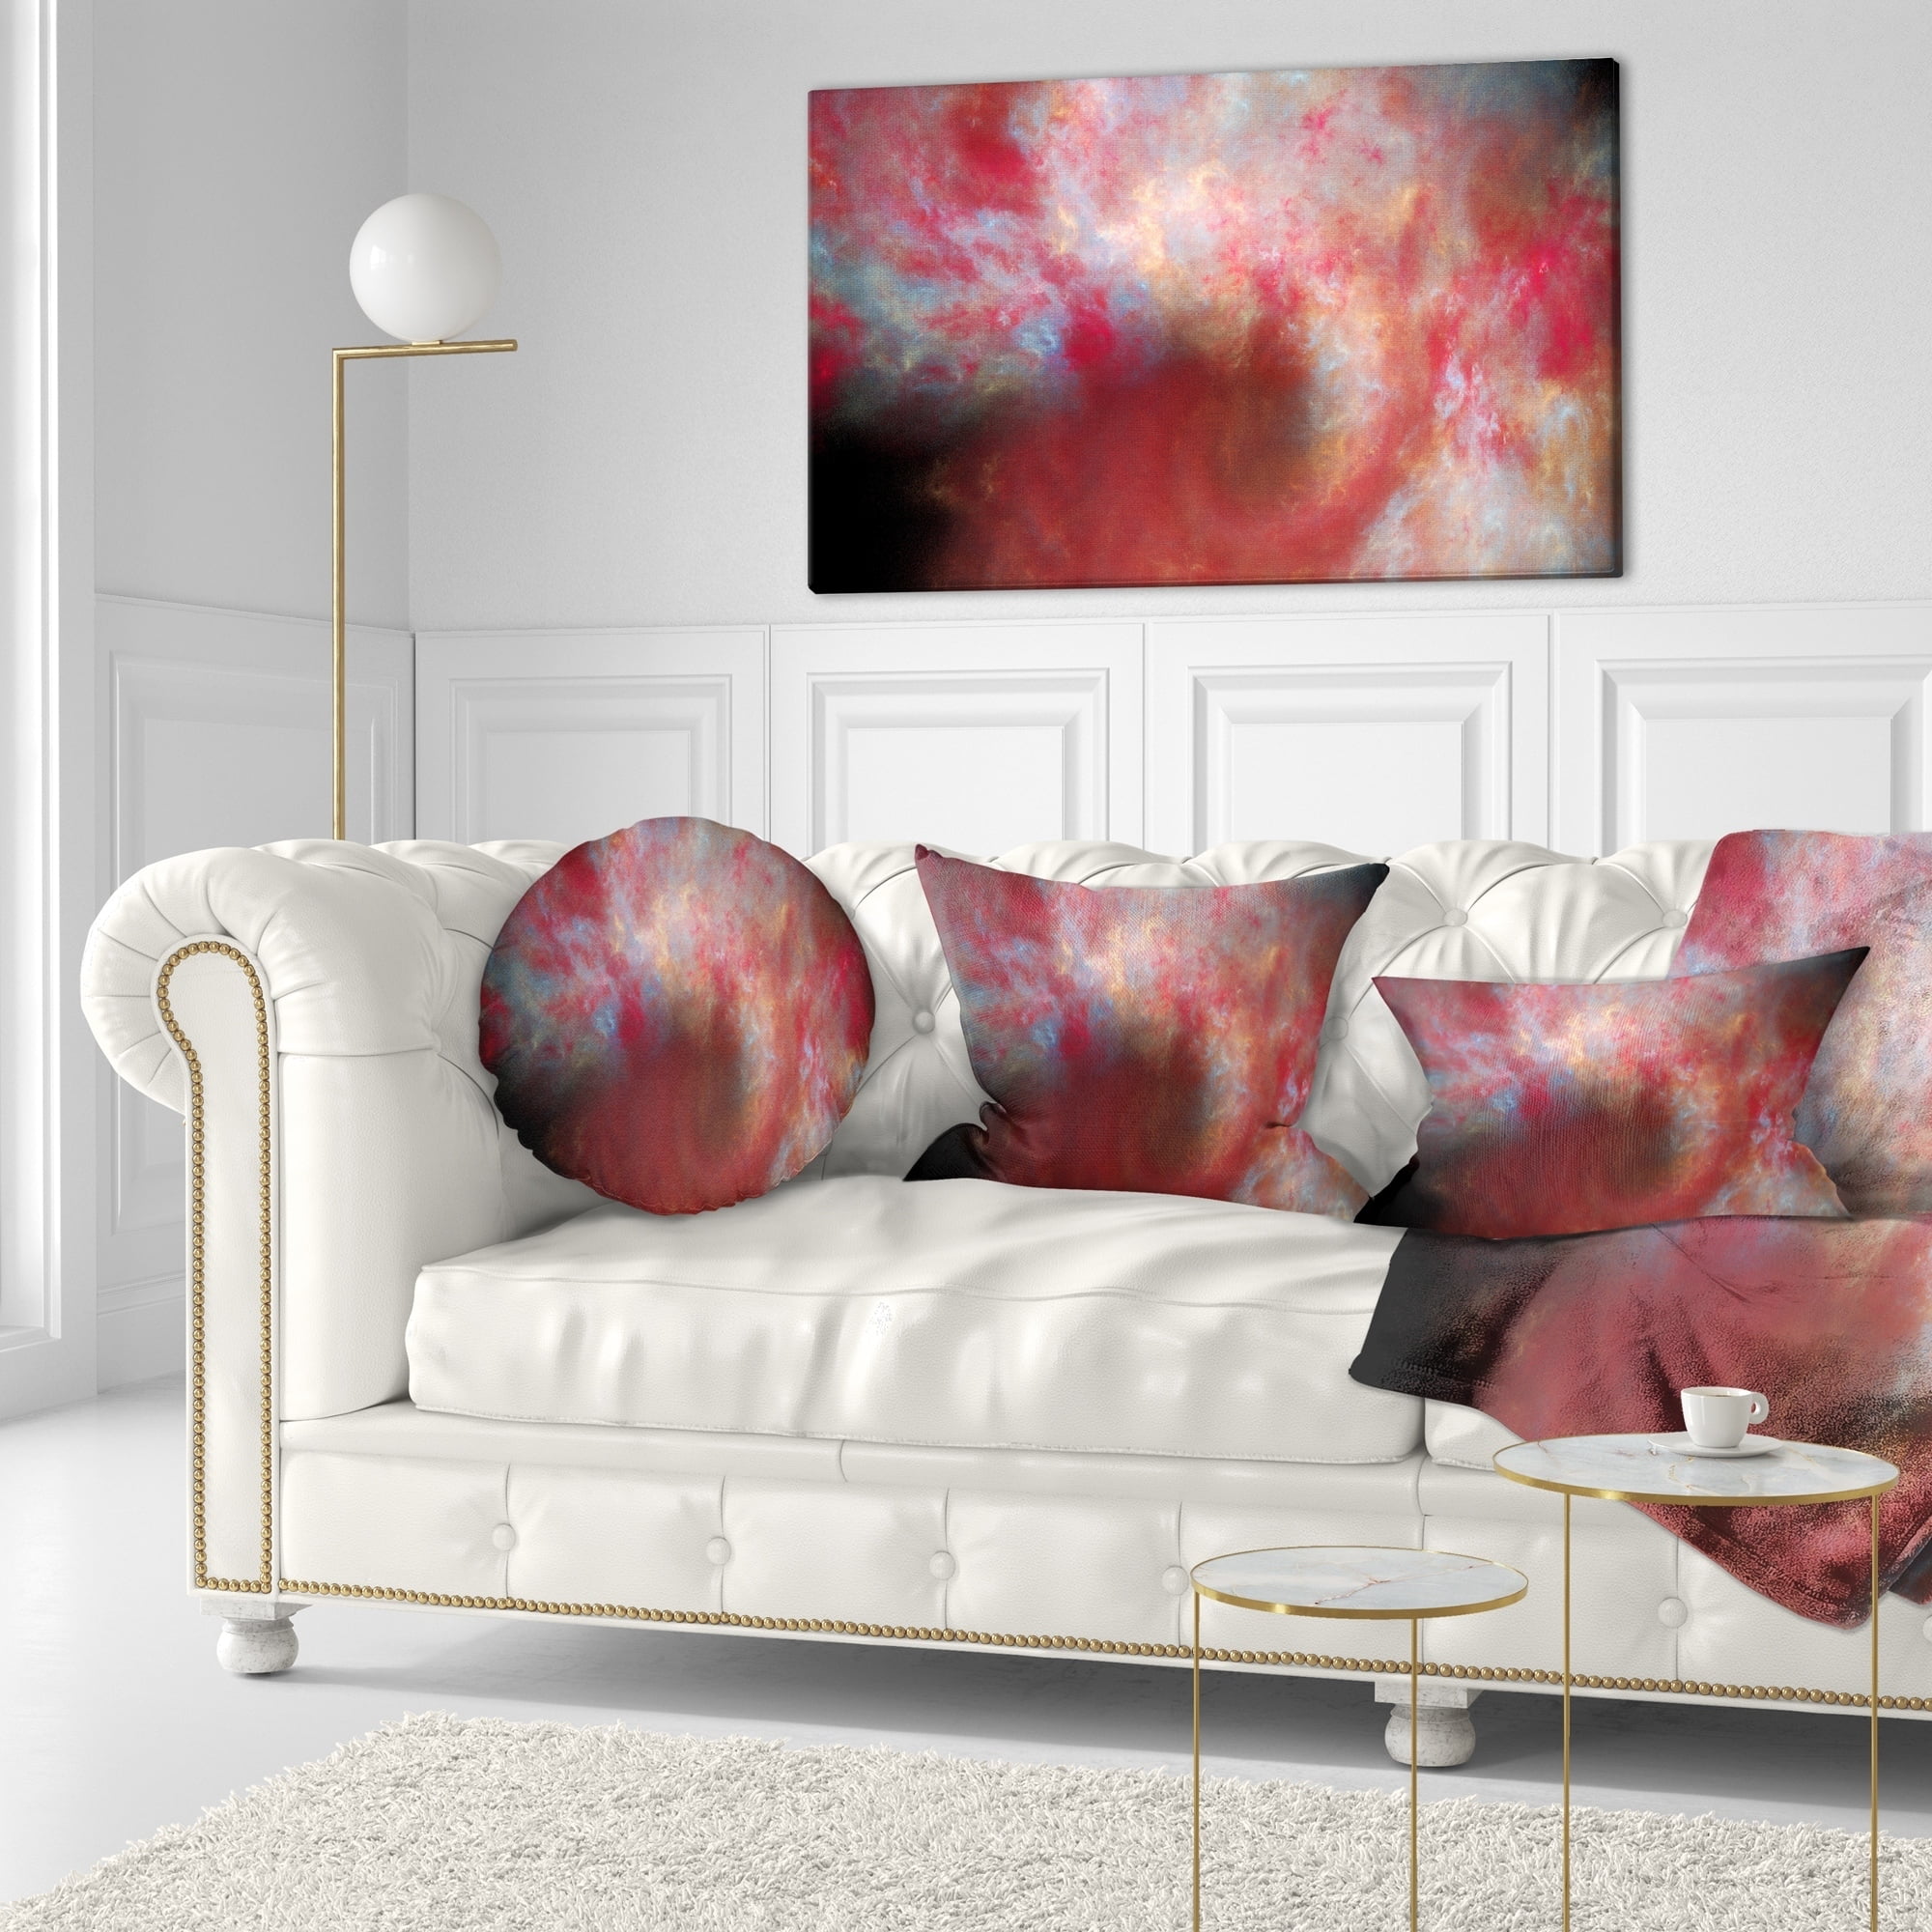 x 26 in Designart CU16364-26-26 Red Starry Fractal Sky Abstract Cushion Cover for Living Room Sofa Throw Pillow 26 in in 